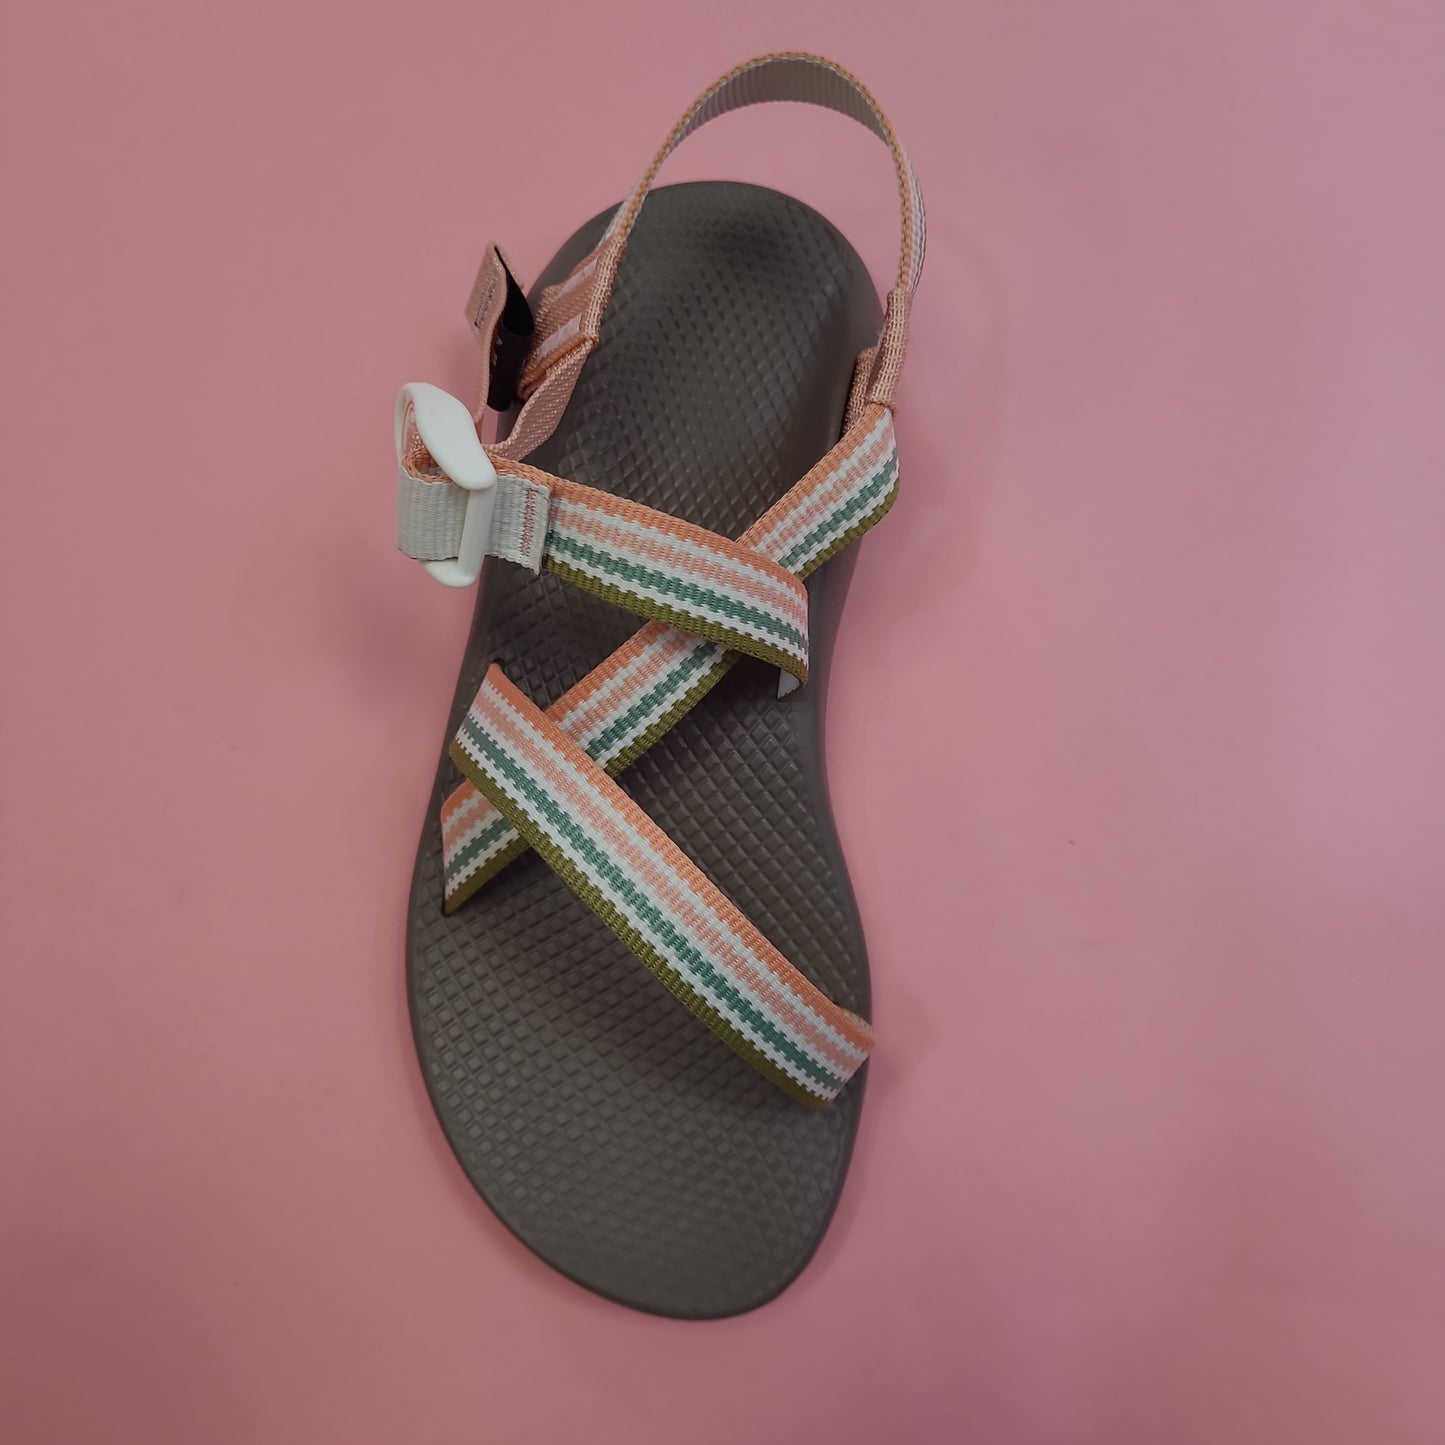 Classic Apricot Sandal By Chaco